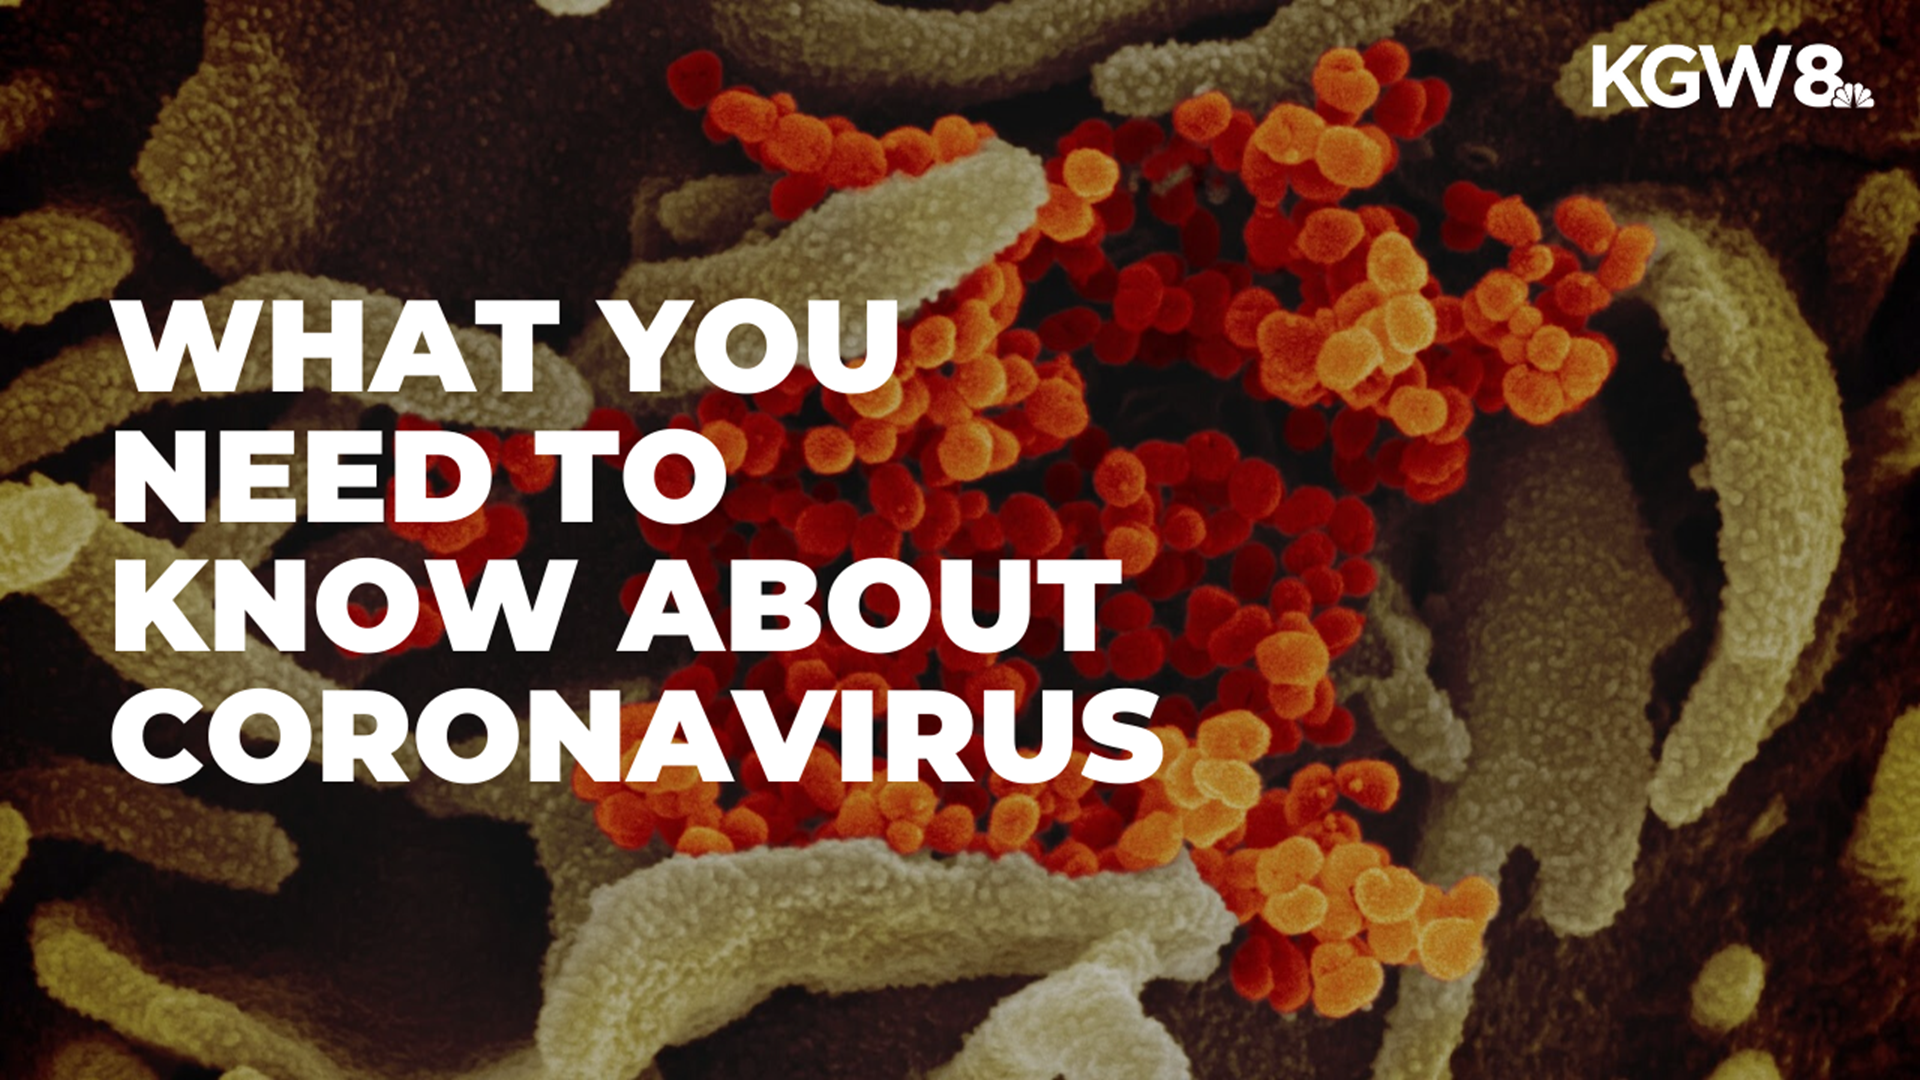 Here are frequently asked questions and answers about COVID-19 or the coronavirus.